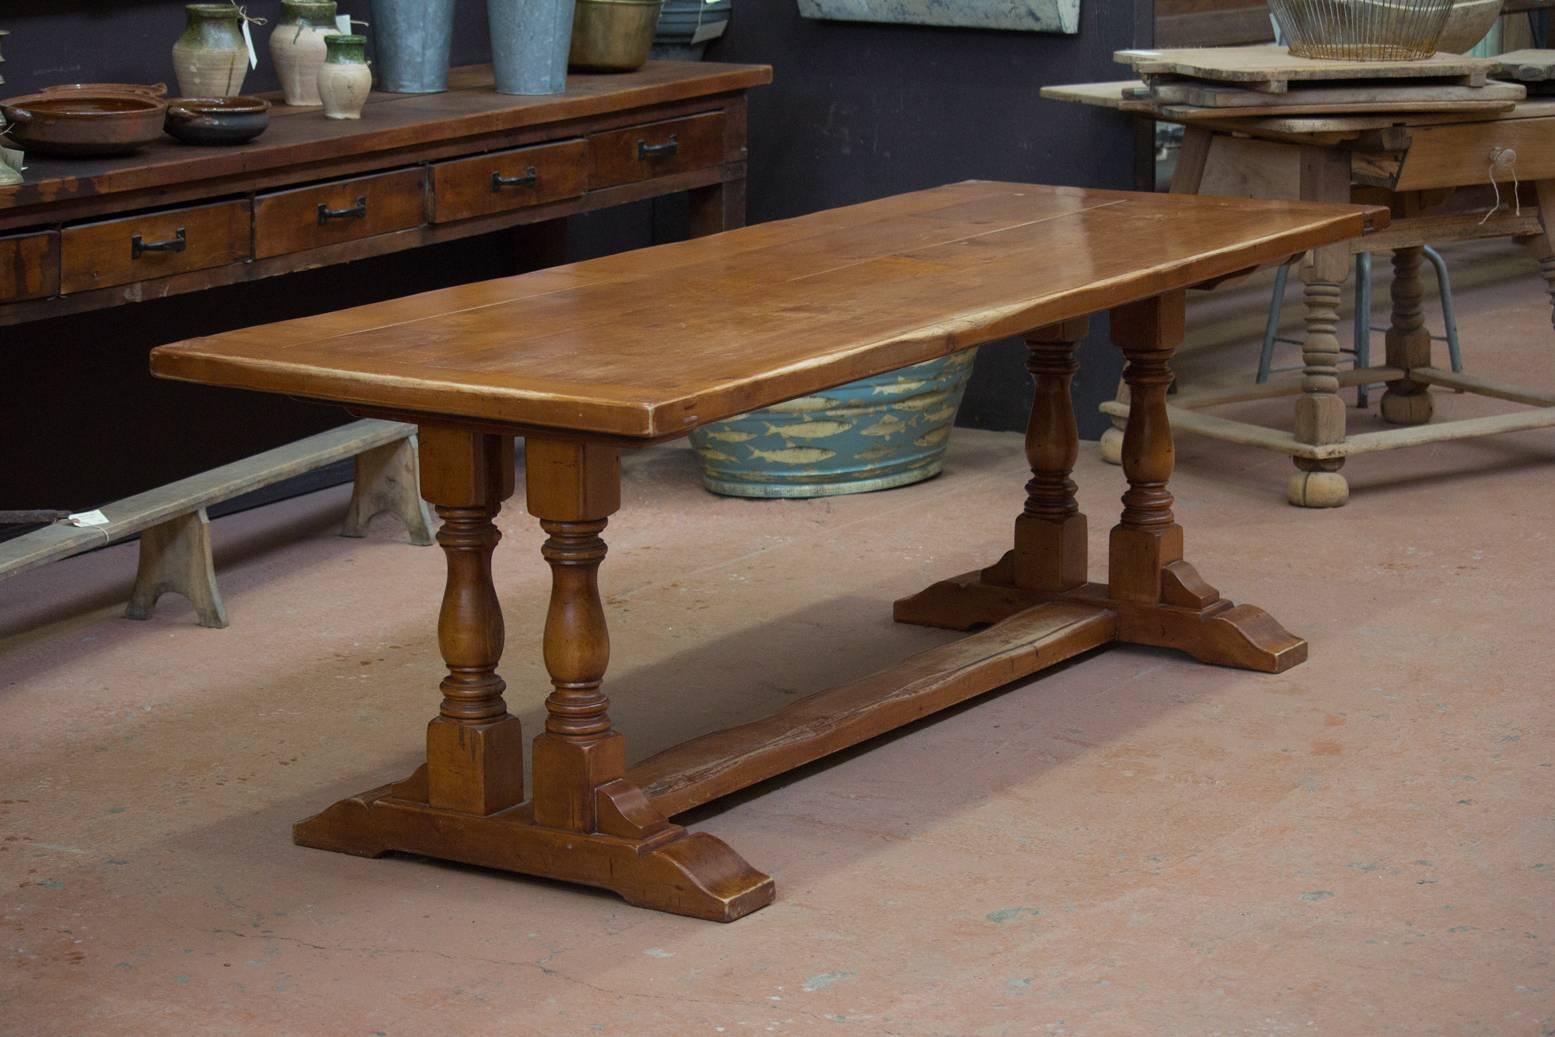 Vintage English cherrywood trestle table with single stretcher and two turned balusters to each end.